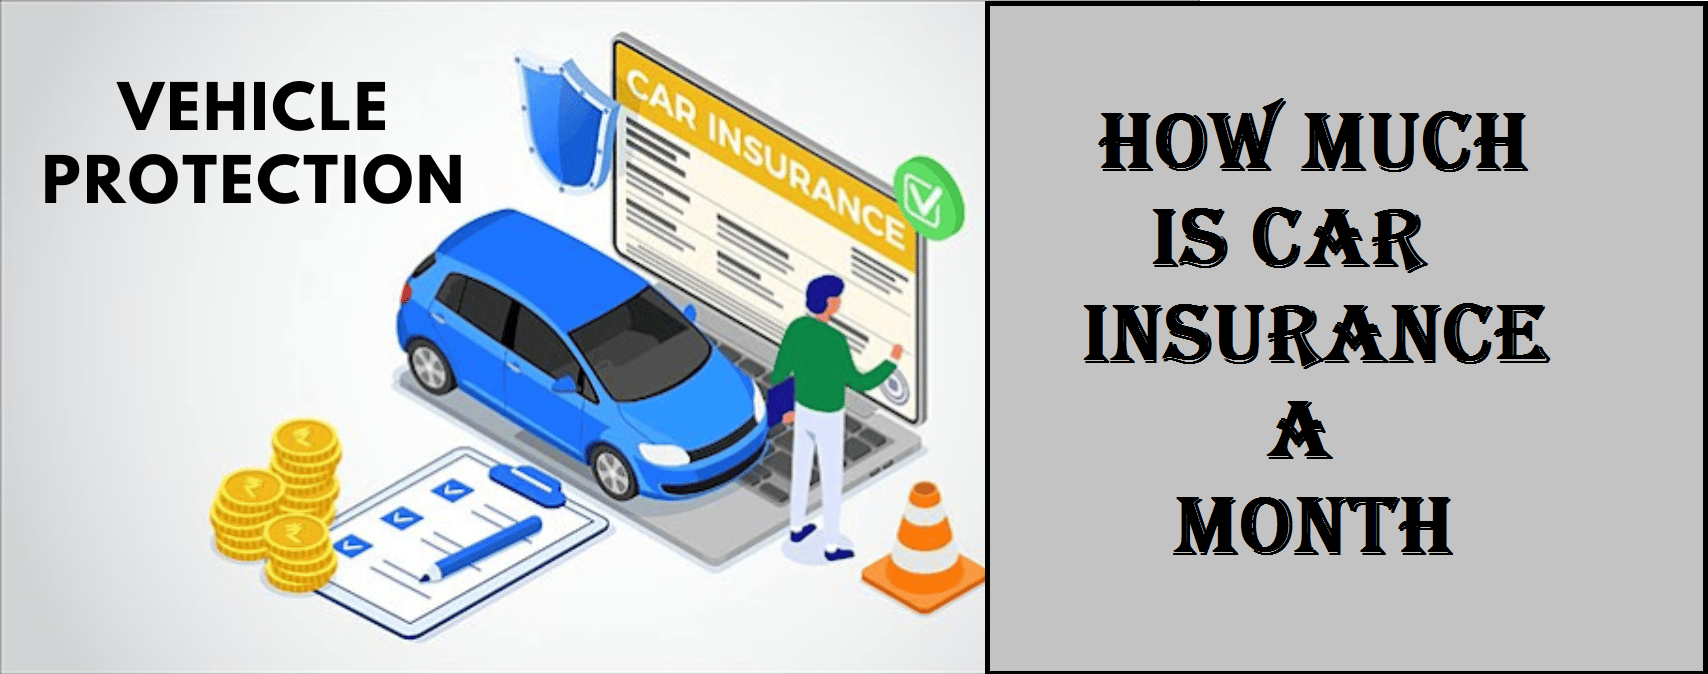 How Much is Car Insurance a Month